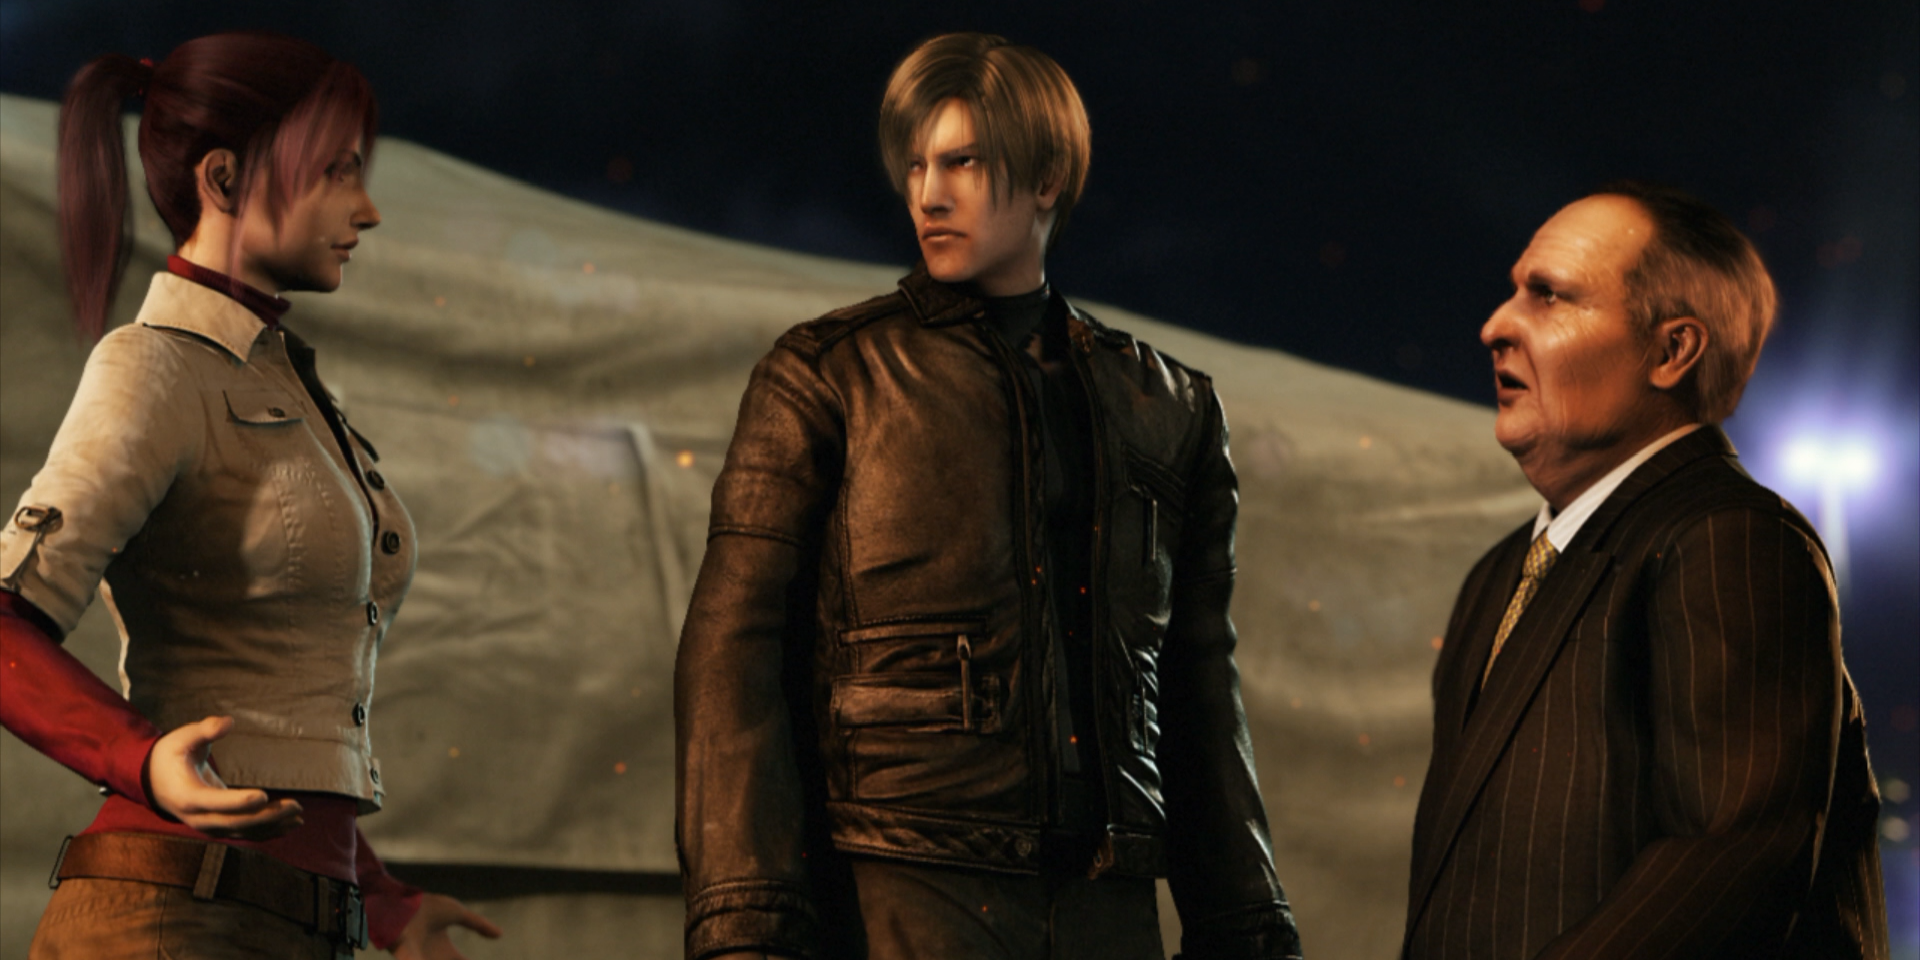 leon, claire and the senator from resident evil degeneration